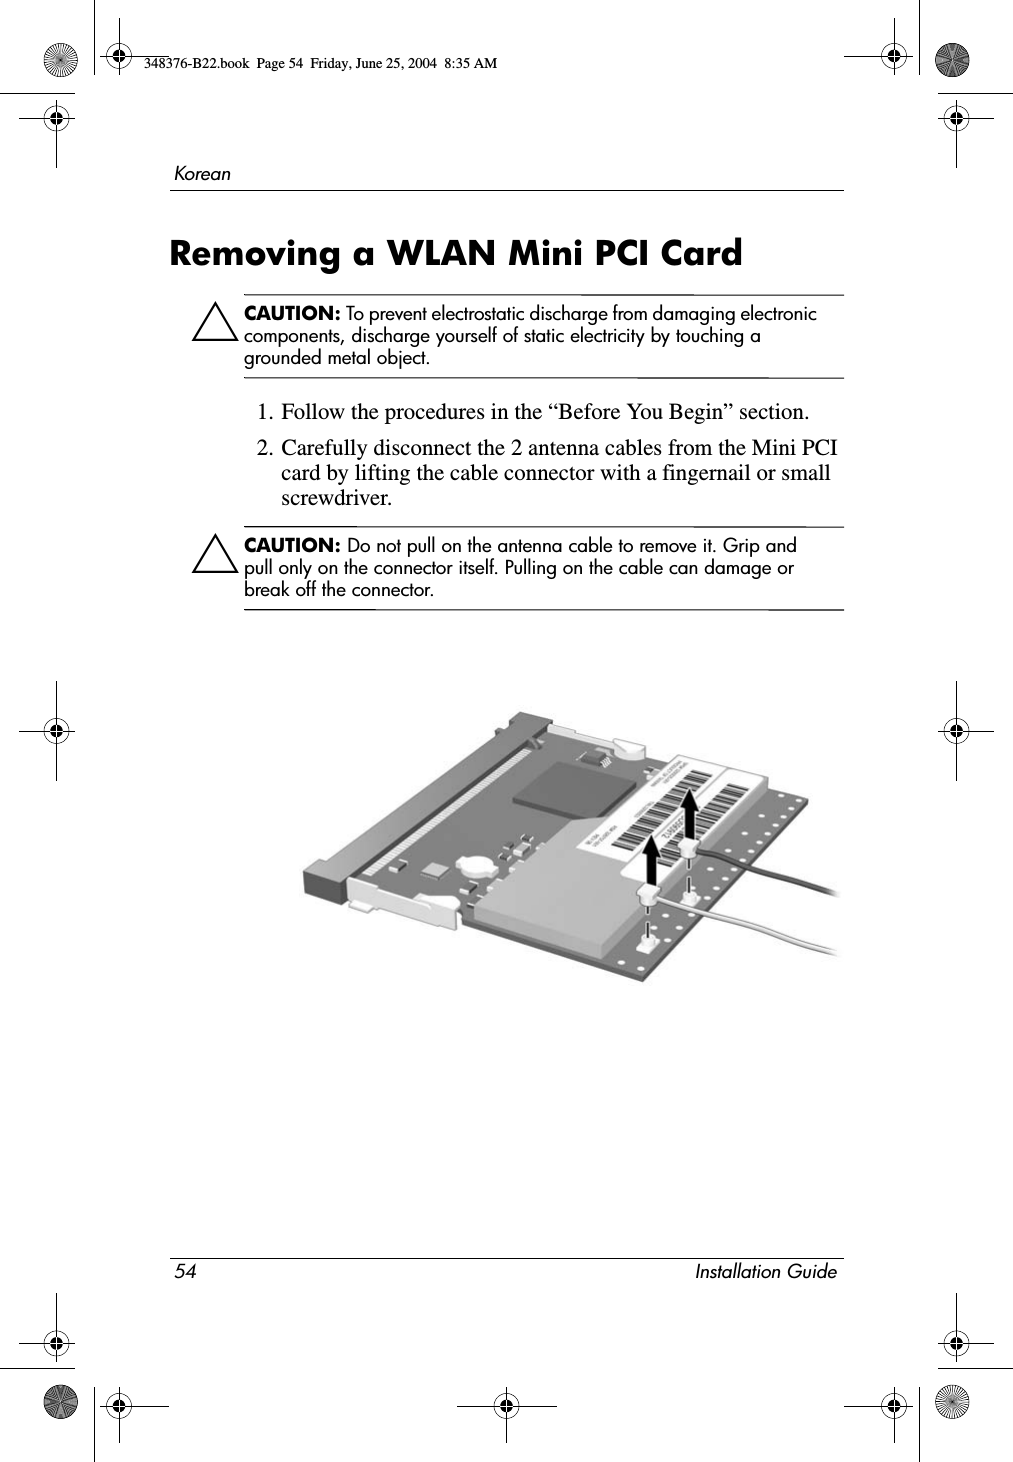 54 Installation GuideKoreanRemoving a WLAN Mini PCI CardÄCAUTION: To prevent electrostatic discharge from damaging electronic components, discharge yourself of static electricity by touching a grounded metal object.1. Follow the procedures in the “Before You Begin” section.2. Carefully disconnect the 2 antenna cables from the Mini PCI card by lifting the cable connector with a fingernail or small screwdriver.ÄCAUTION: Do not pull on the antenna cable to remove it. Grip and pull only on the connector itself. Pulling on the cable can damage or break off the connector.348376-B22.book  Page 54  Friday, June 25, 2004  8:35 AM